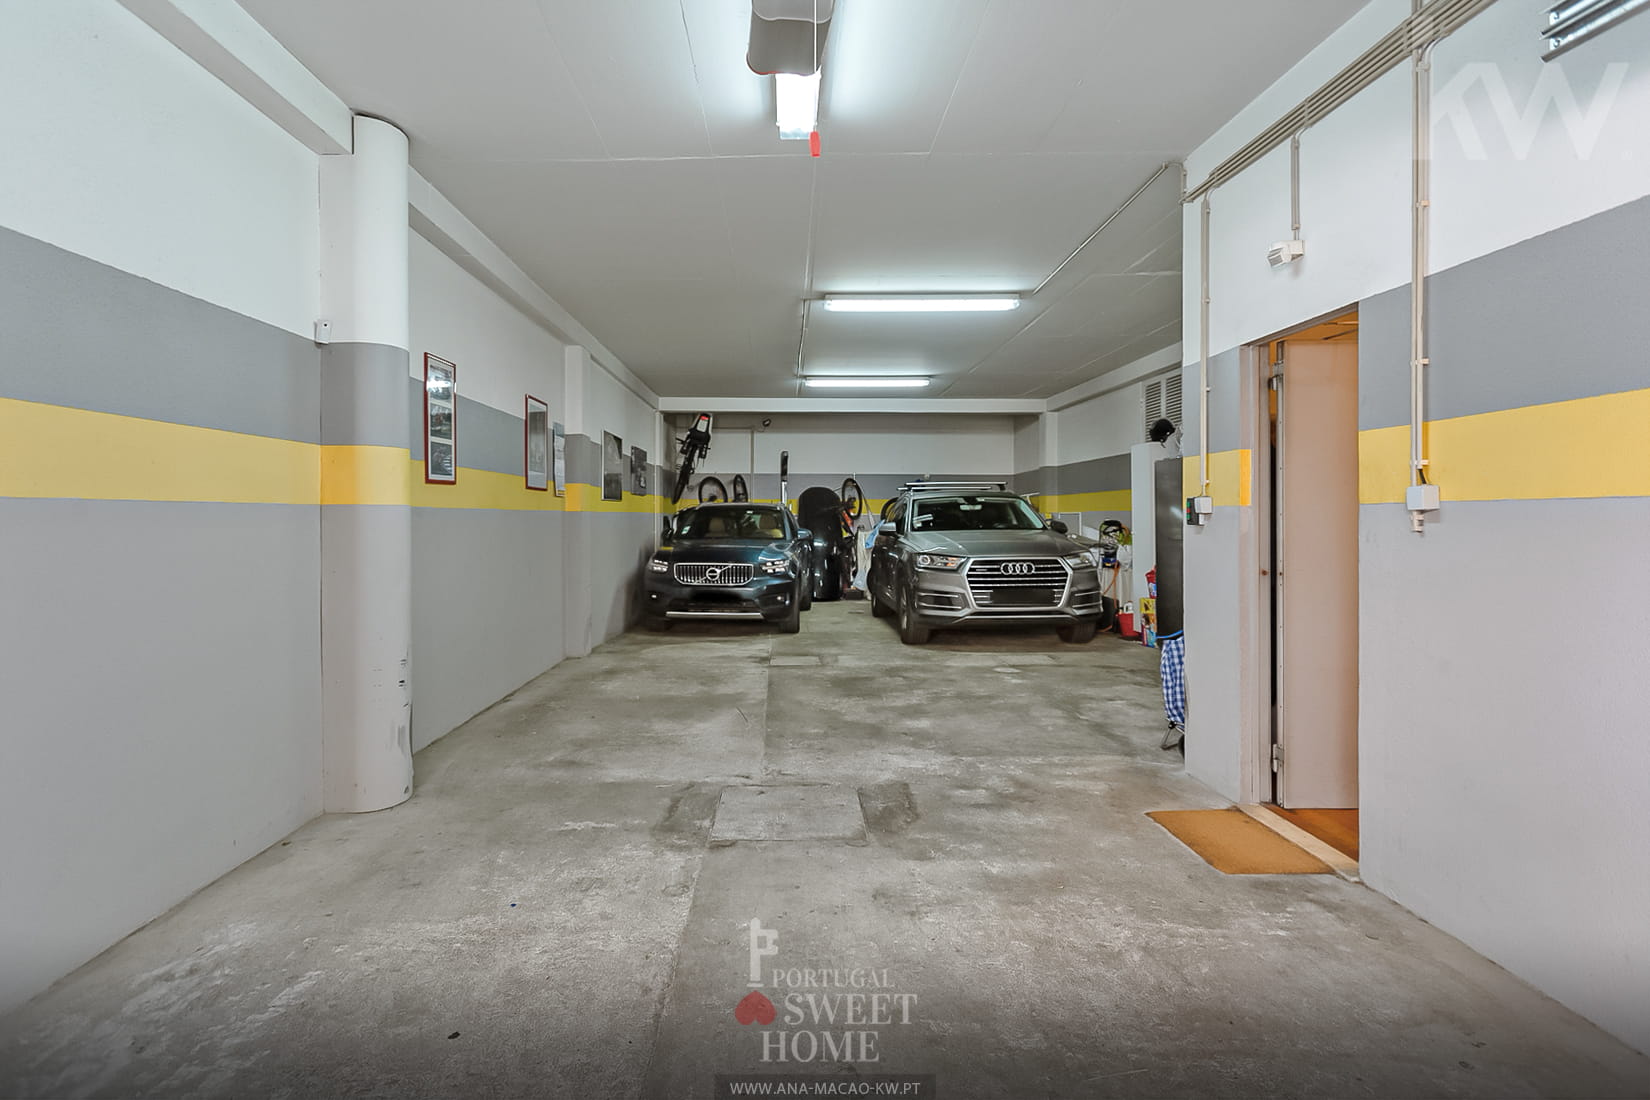 Spacious garage (82.8 m2) on Floor 0 for 4 cars